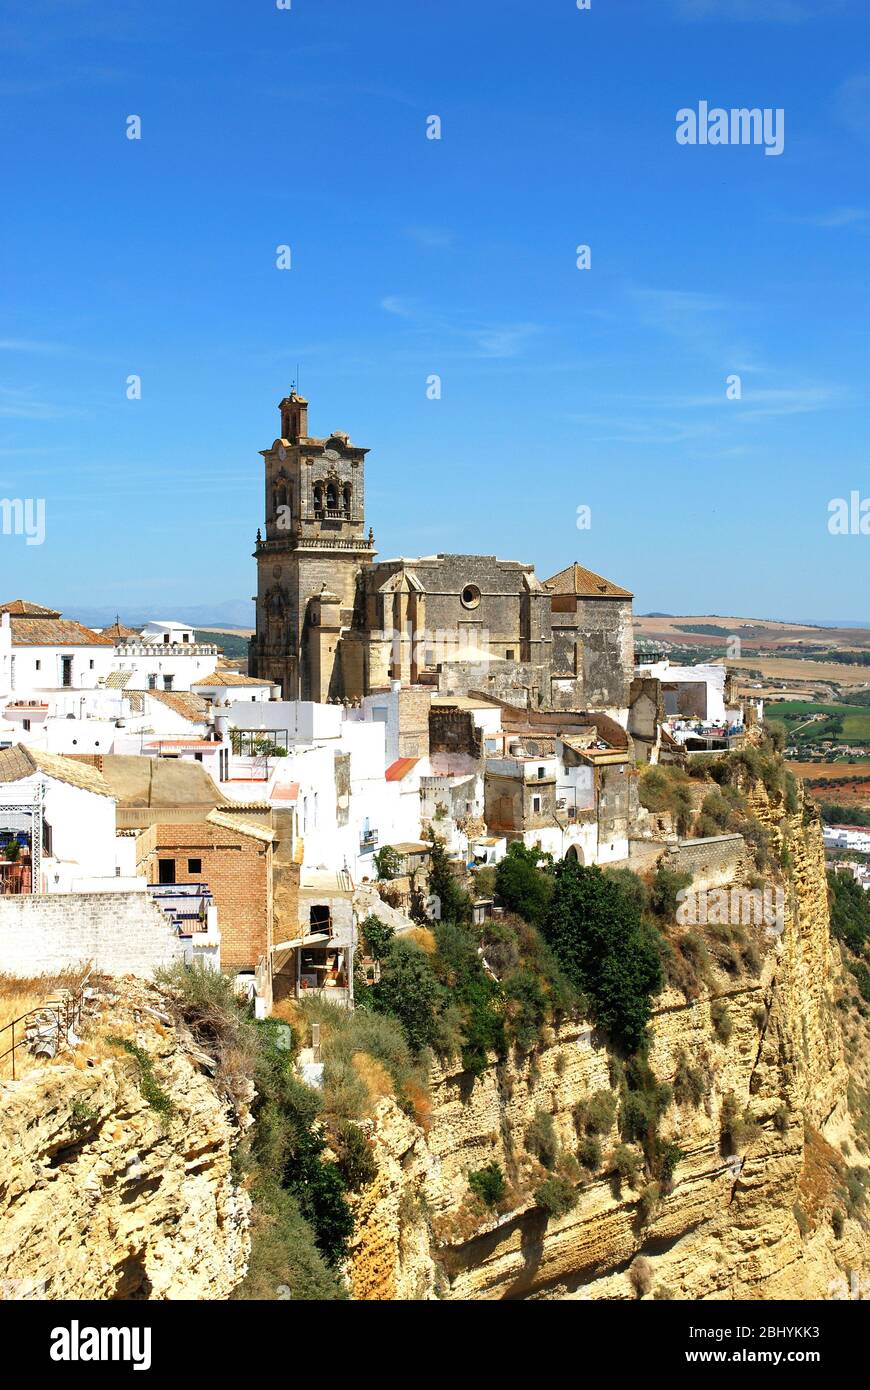 View of St Peters Church and the old town, Arcos de la Frontera, Andalucia, Spain. Stock Photo